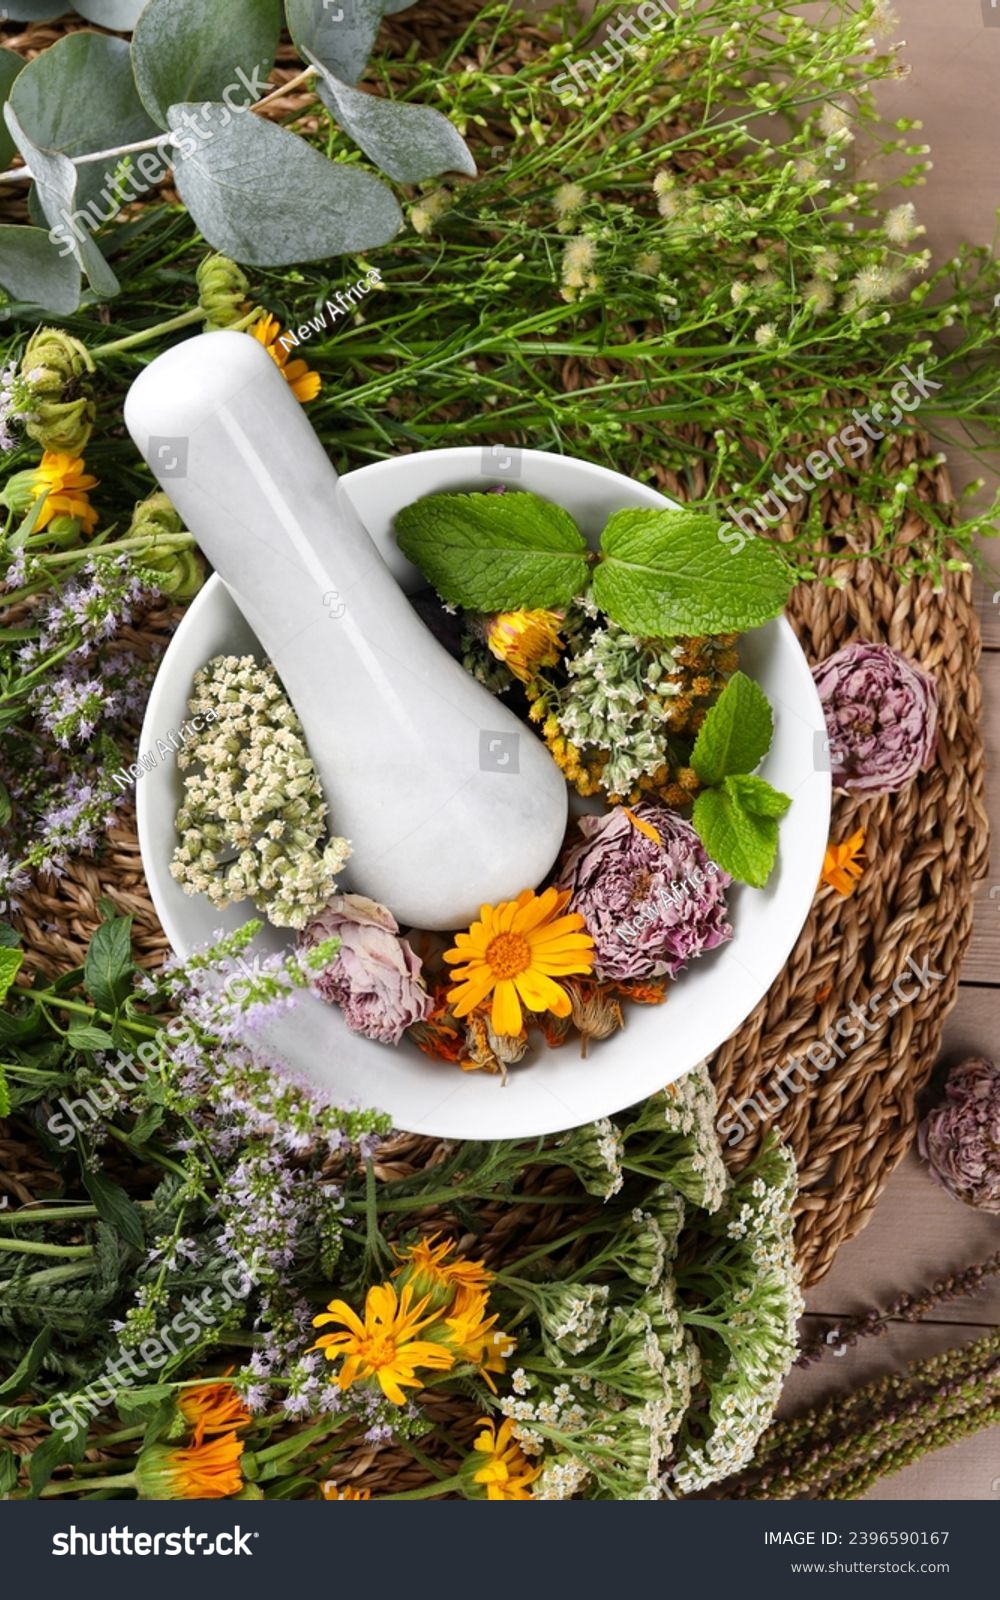 Mortar with pestle and many different herbs on table, flat lay #2396590167